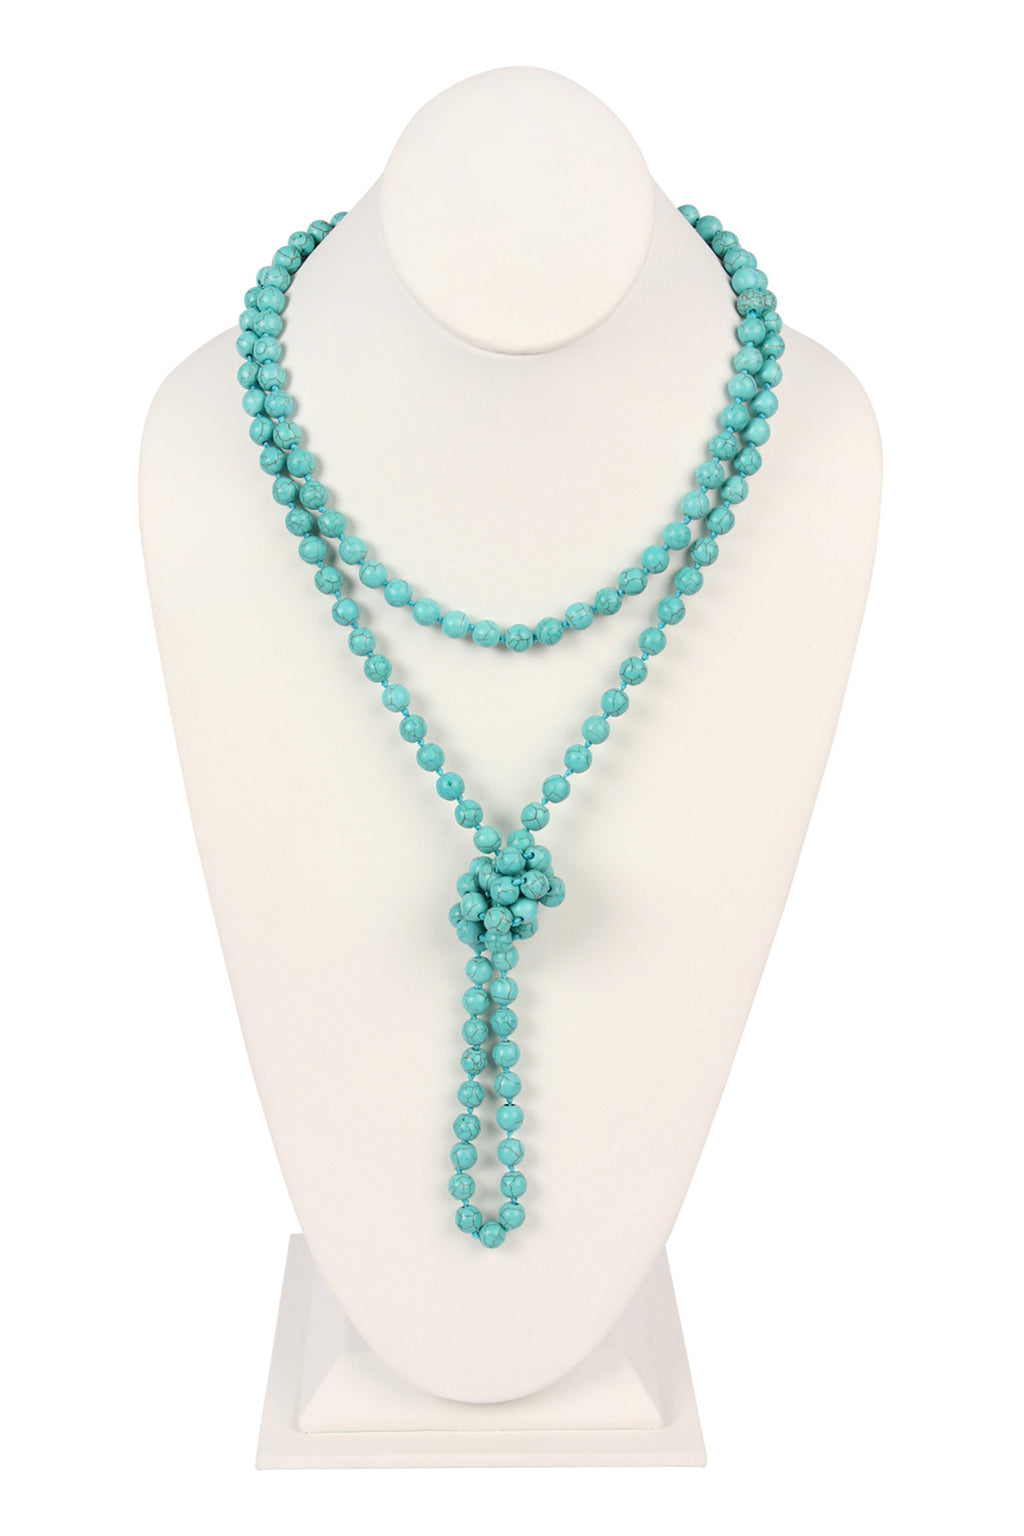 Turquoise Natural Stone Hand Knotted Long Necklace - Pack of 6